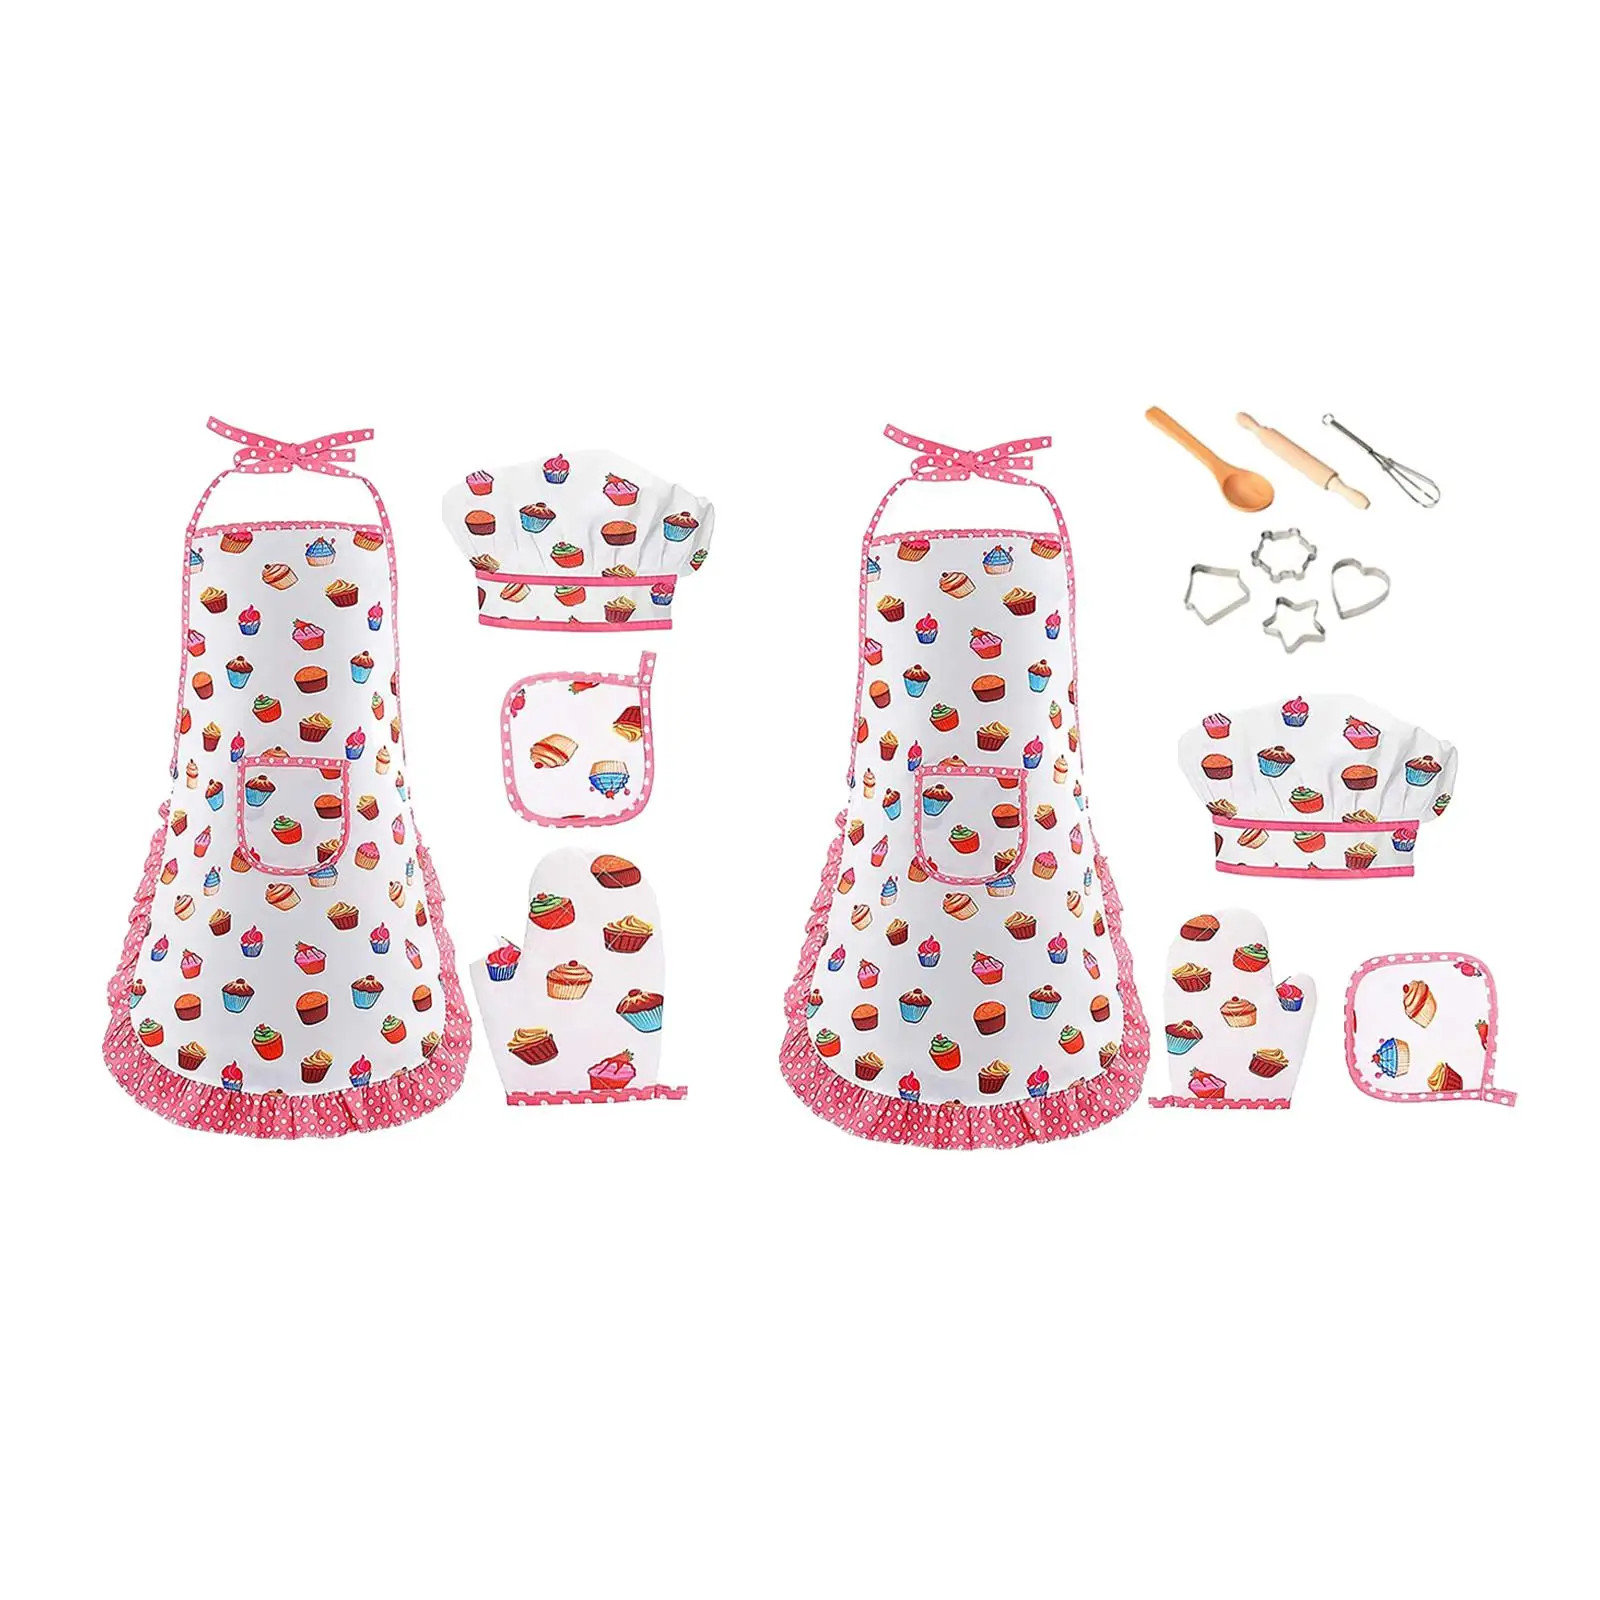 Montessori Clothes Set Role Play Toy Oven Mitts Hat for Kids Children